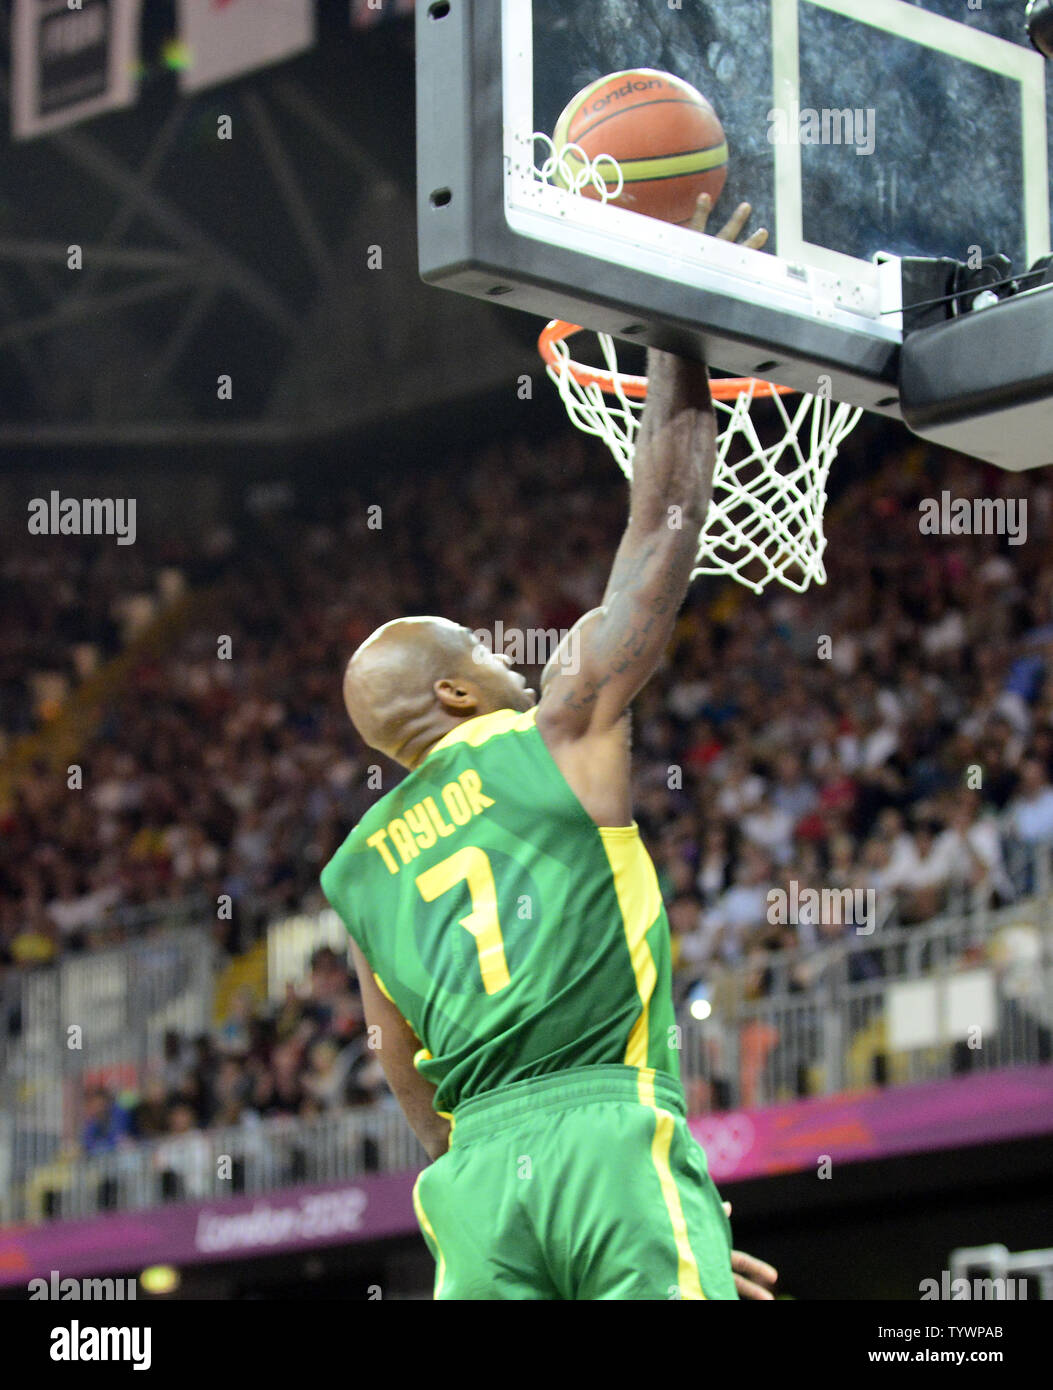 Larry Taylor (7) of Brazil scores in first half action of the Great Britain v. Brazil preliminary round - group B basketball game at the London 2012 Summer Olympics on July 31, 2012 in London.   UPI/Ron Sachs Stock Photo